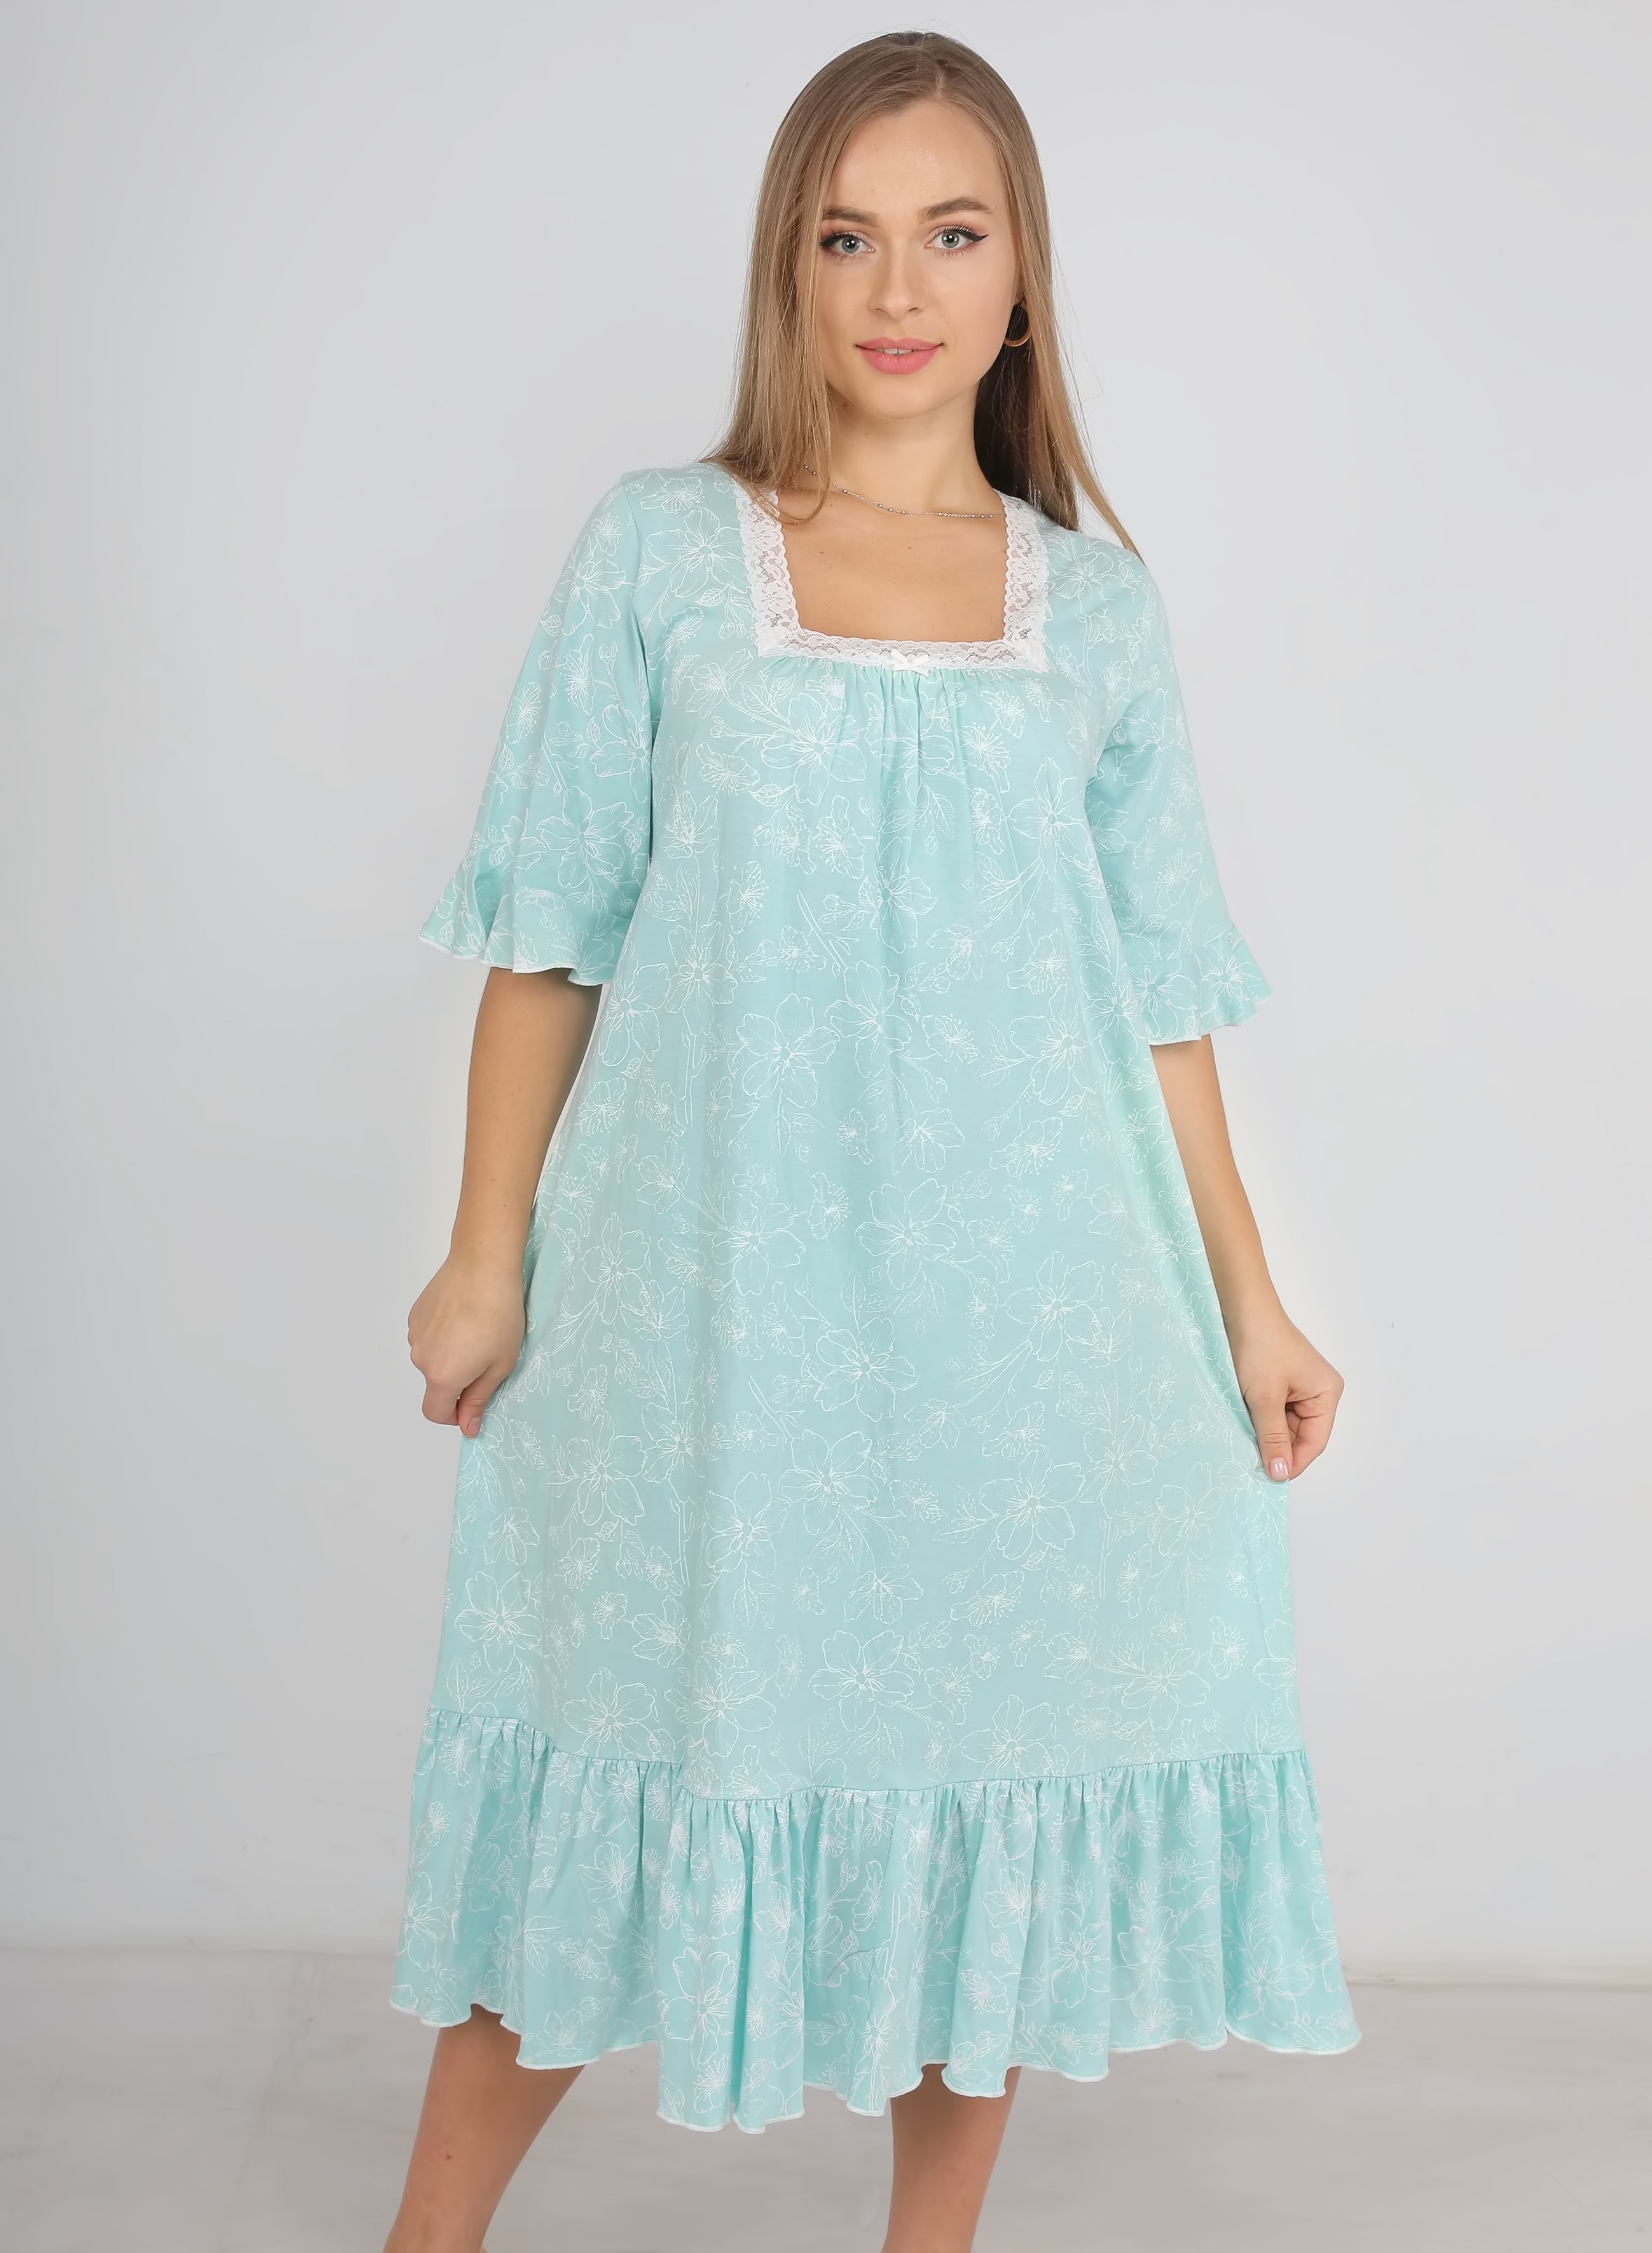 Short Sleeve All Over Printed Nightdress